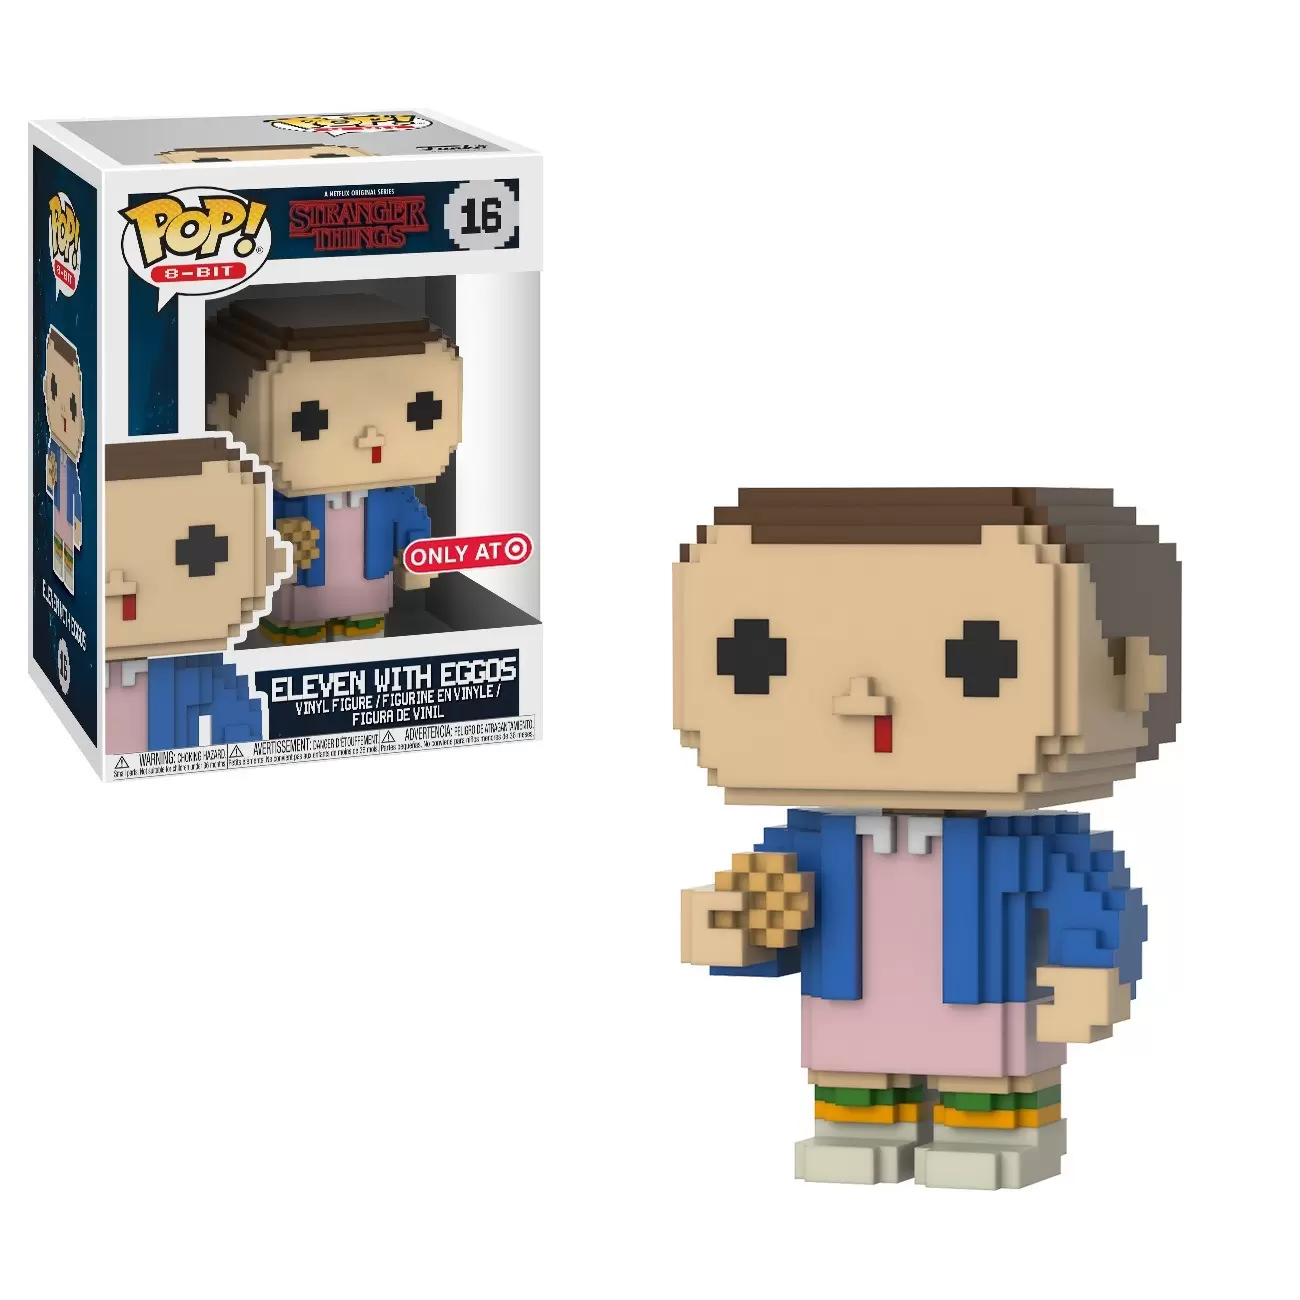 POP! 8-Bit - Stranger Things - Eleven with Eggos